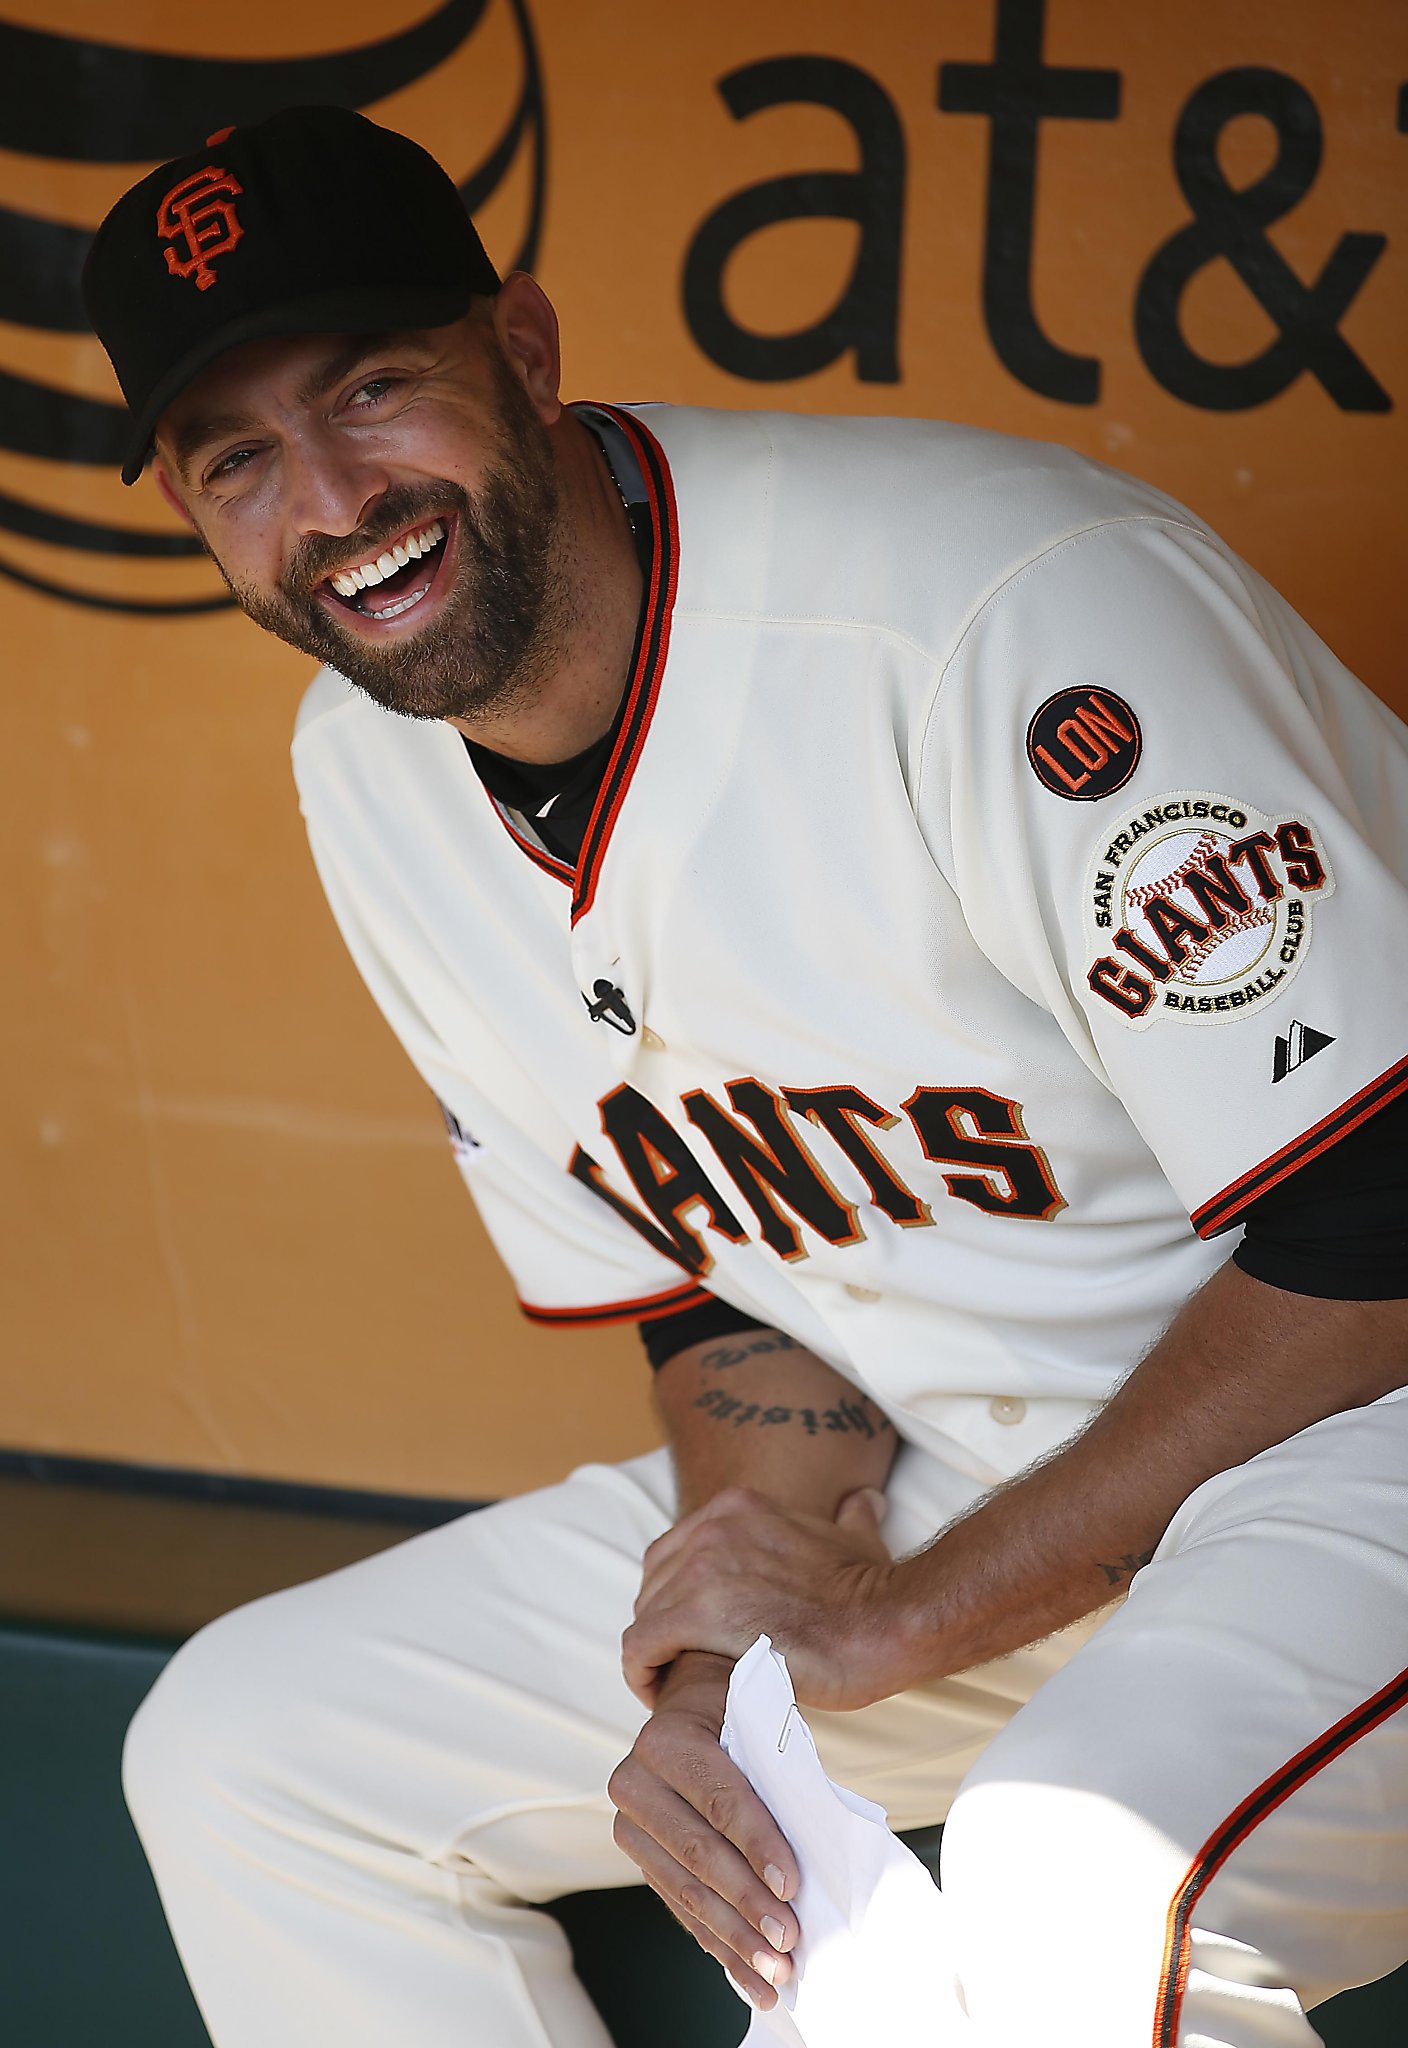 Tour of the Giants Clubhouse with Jeremy Affeldt 